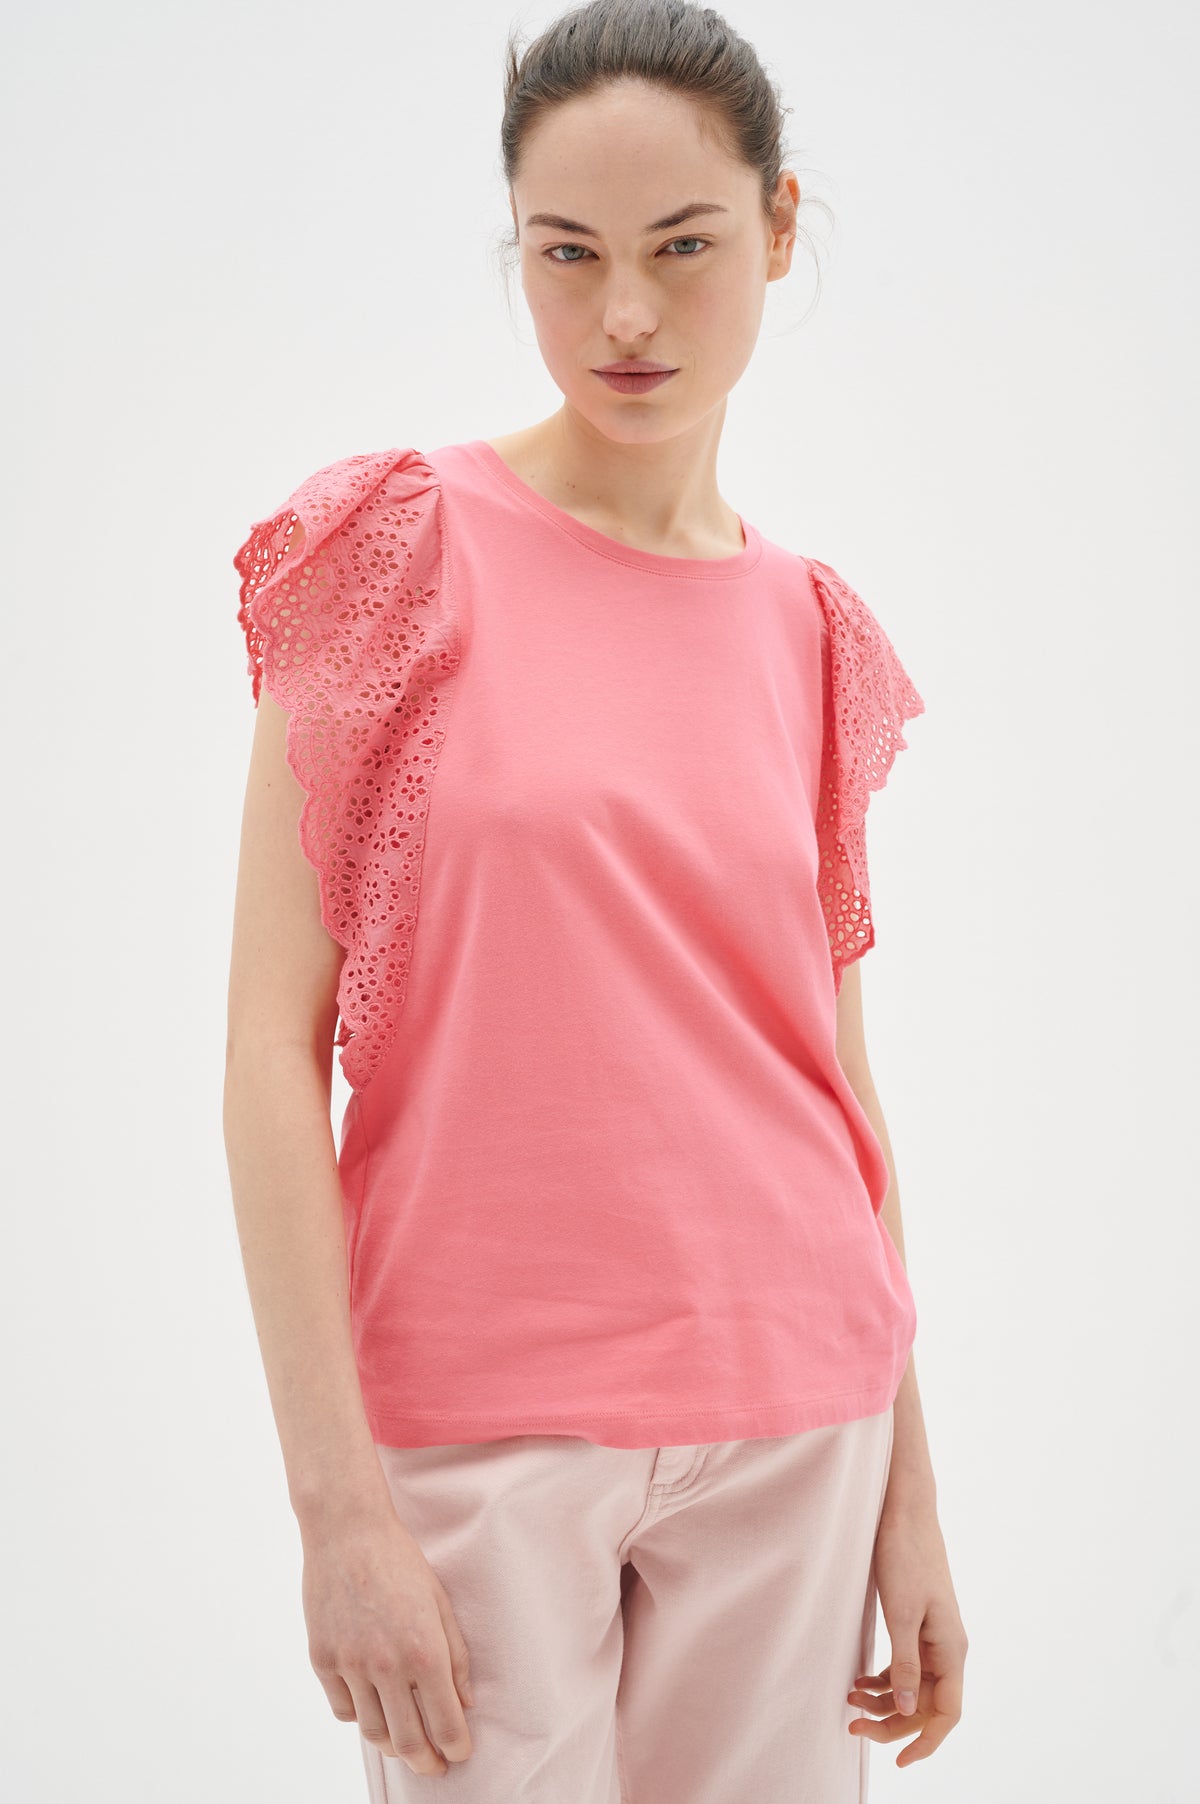 InWear Vume Pink Rose Embroidered Sleeveless Top, 30108376